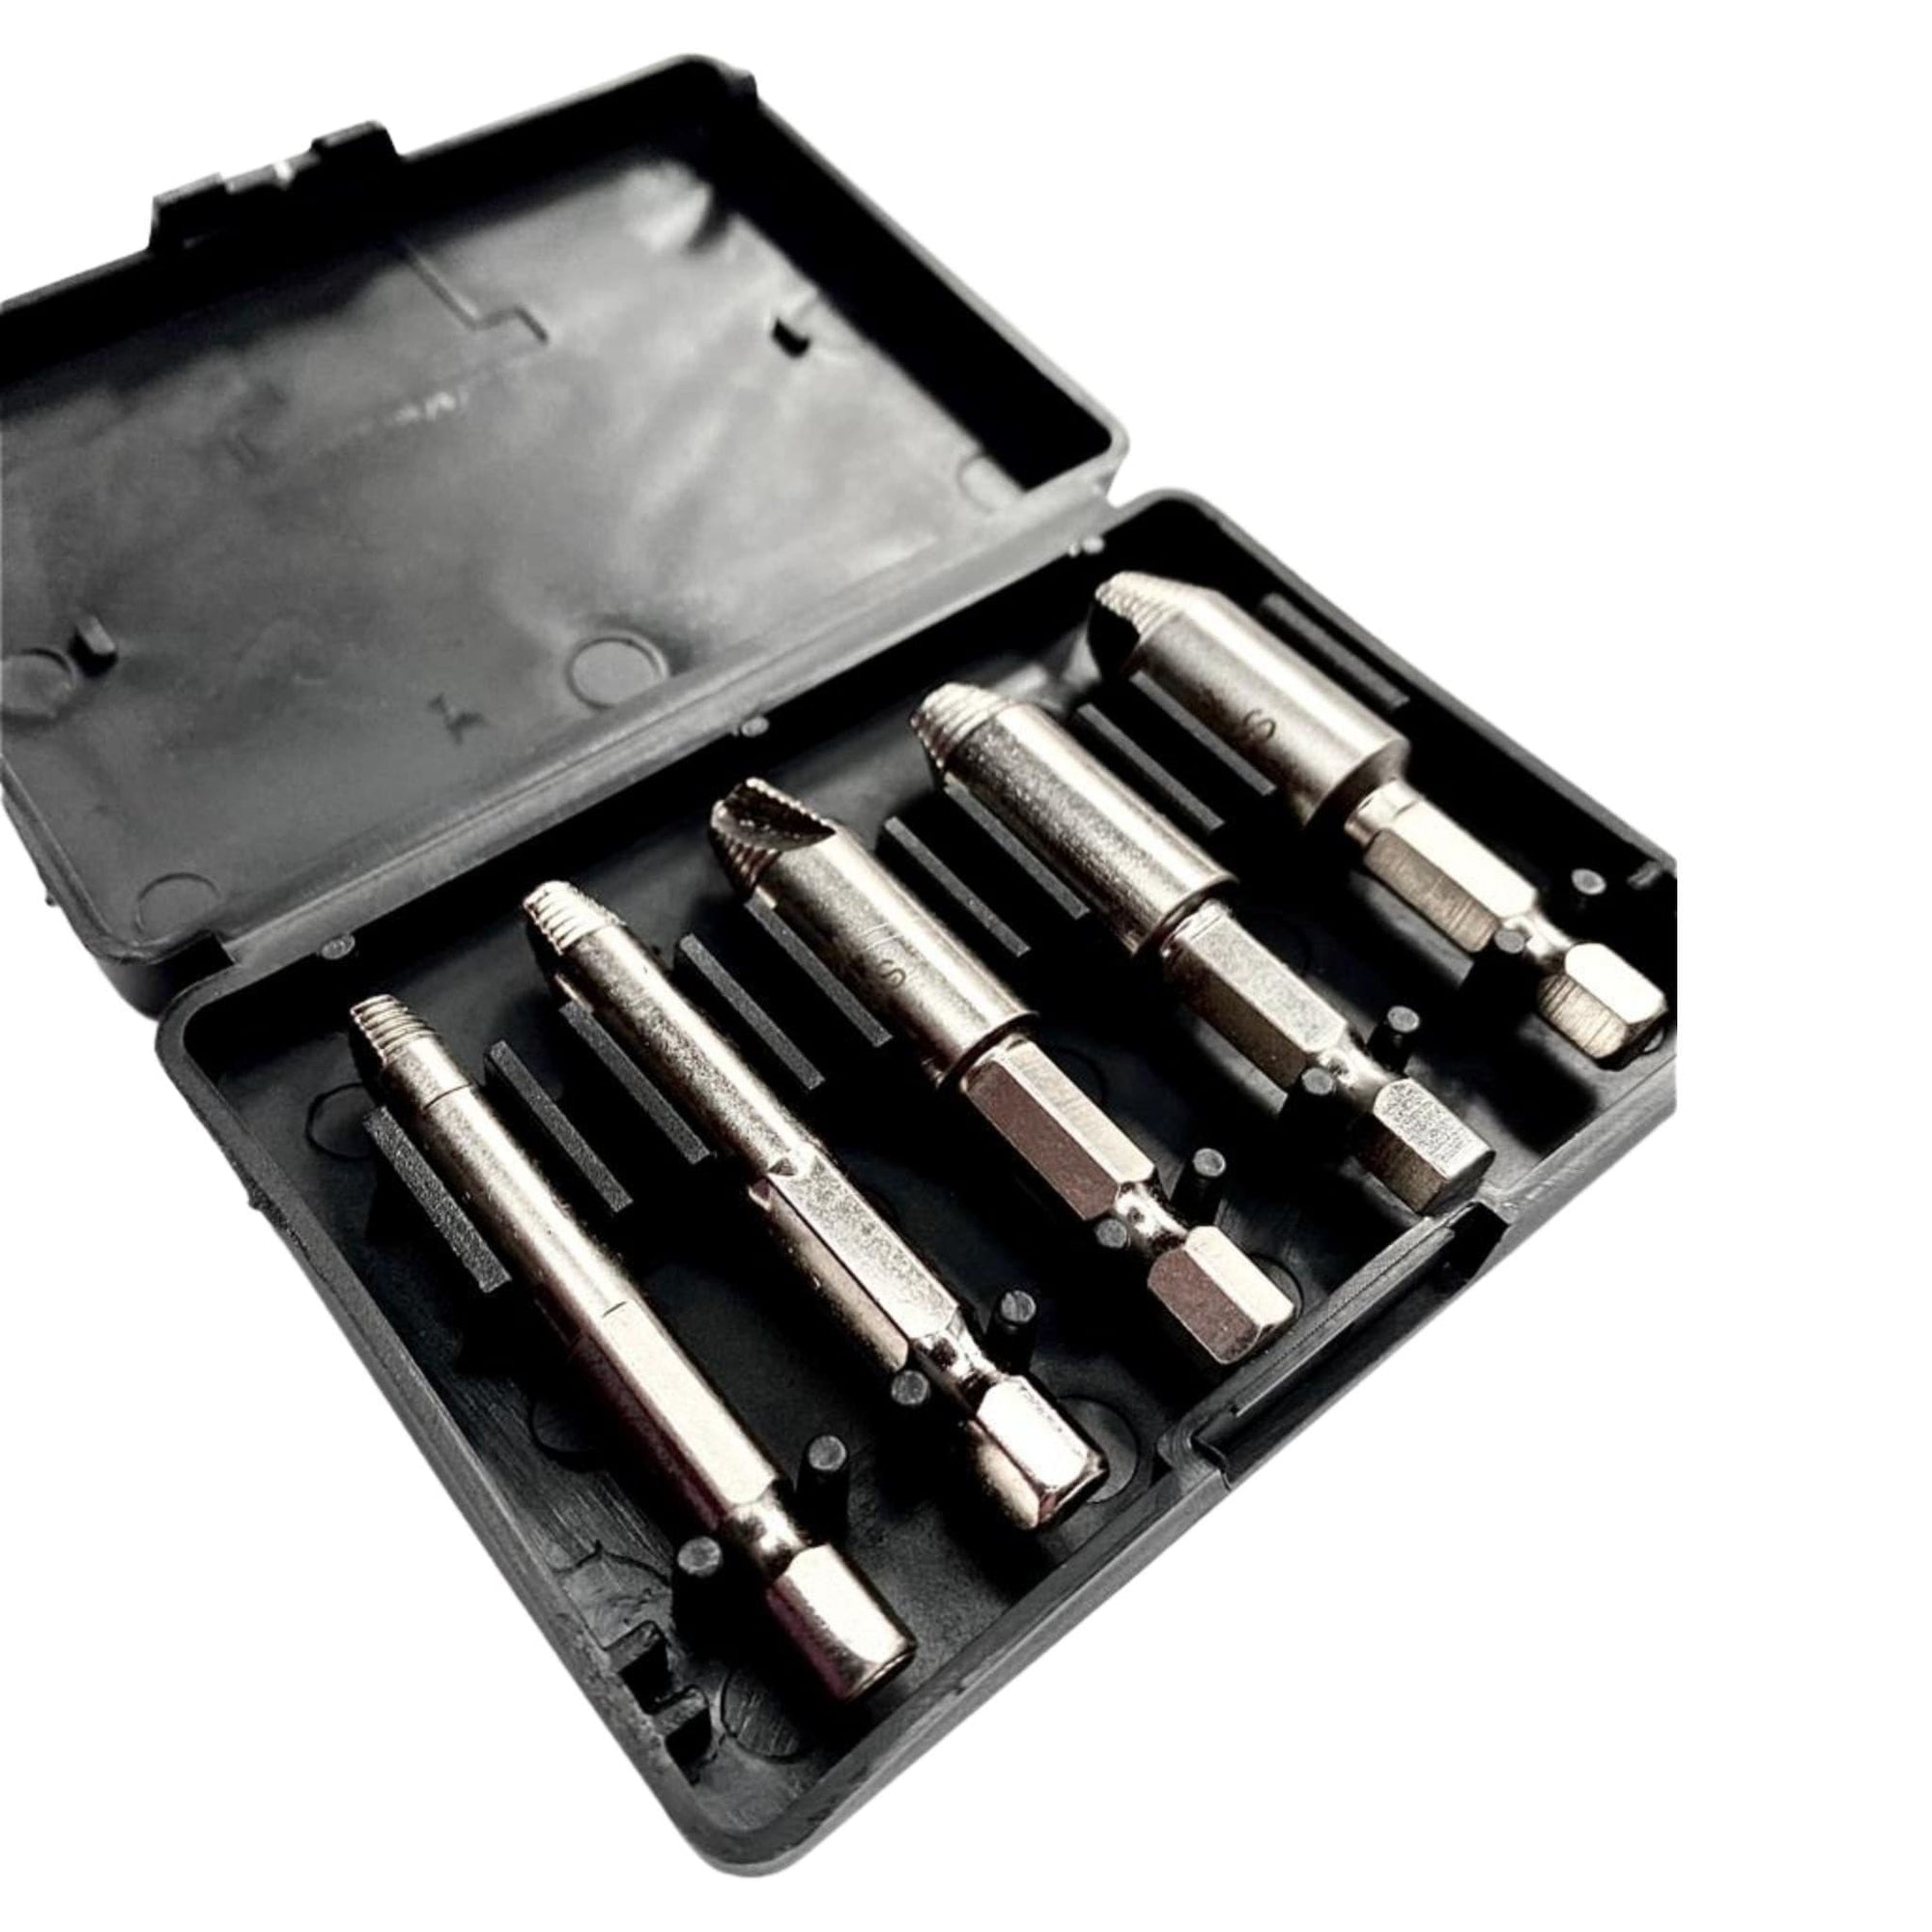 5 piece screw extractor set - South East Clearance Centre